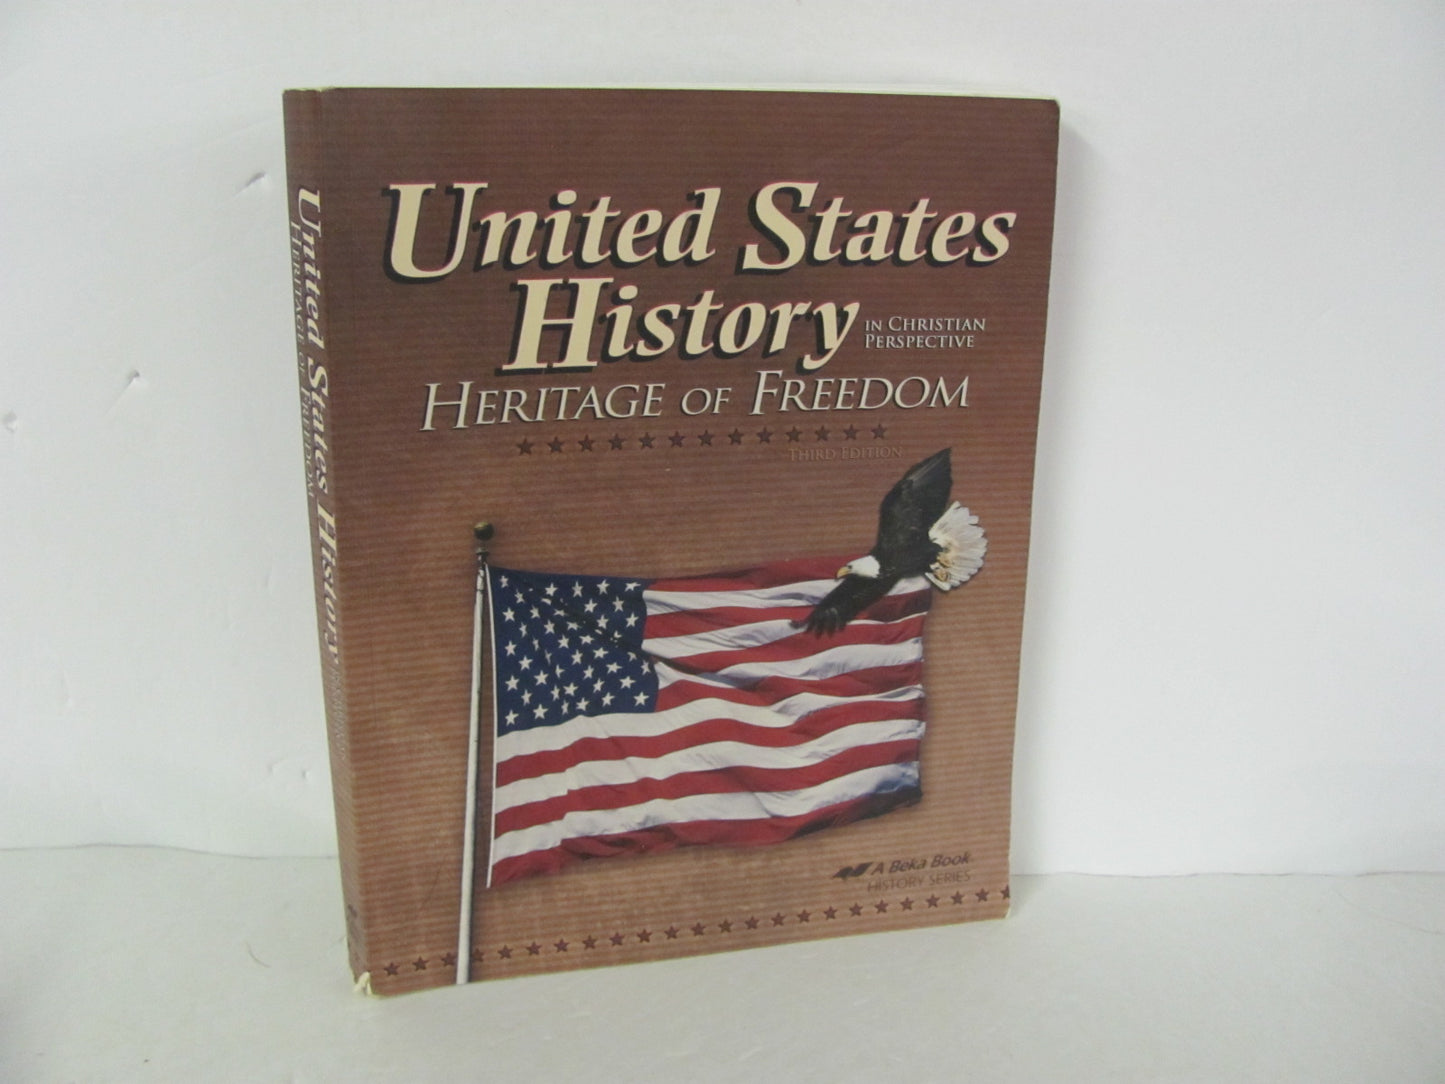 United States History Abeka Student Book Pre-Owned 11th Grade History Textbooks